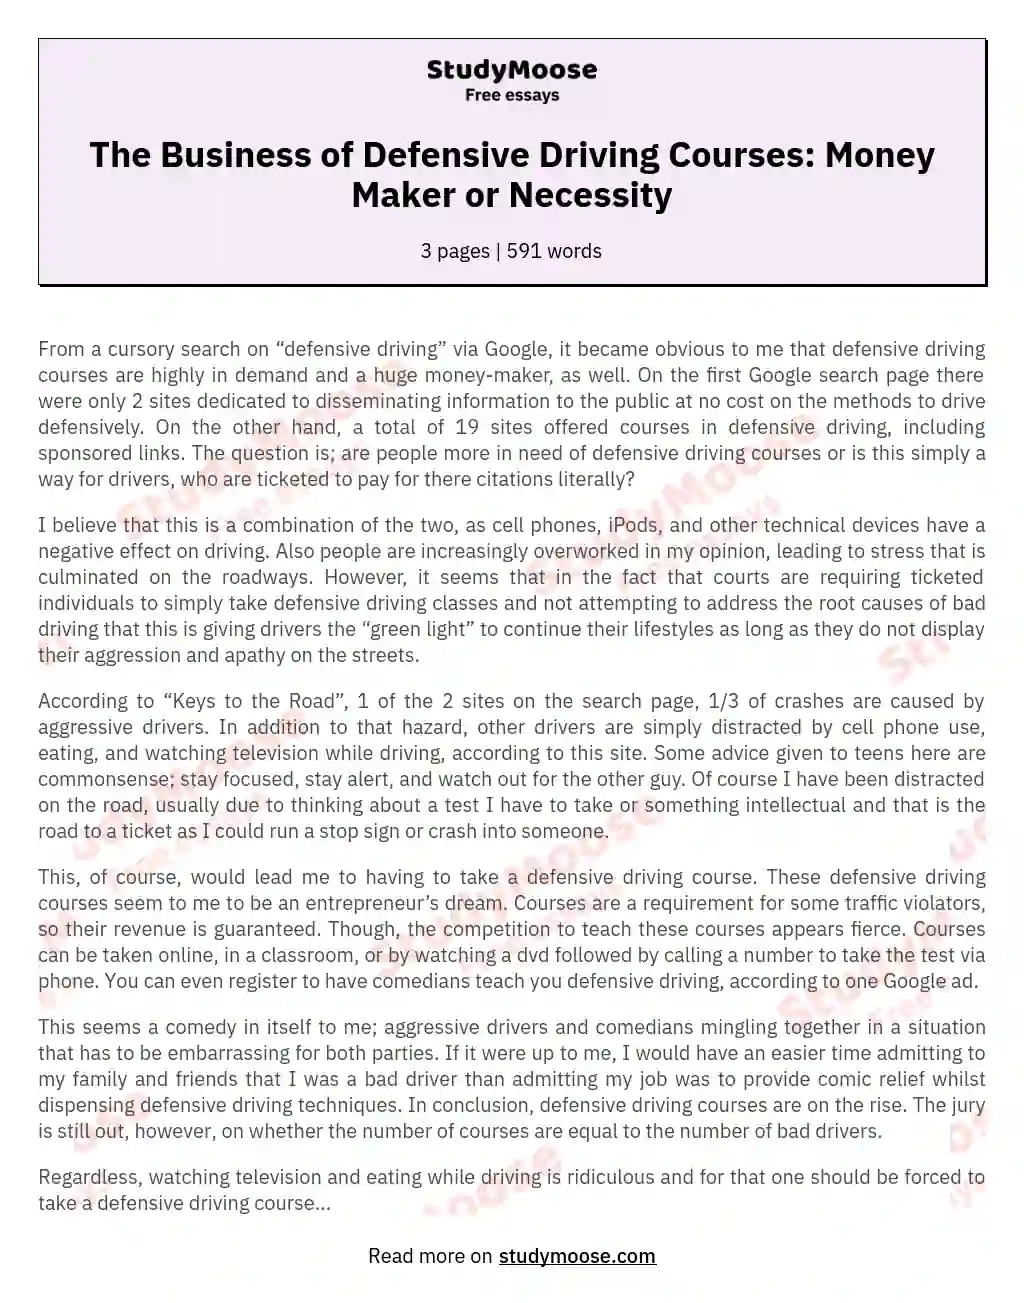 The Business of Defensive Driving Courses: Money Maker or Necessity essay